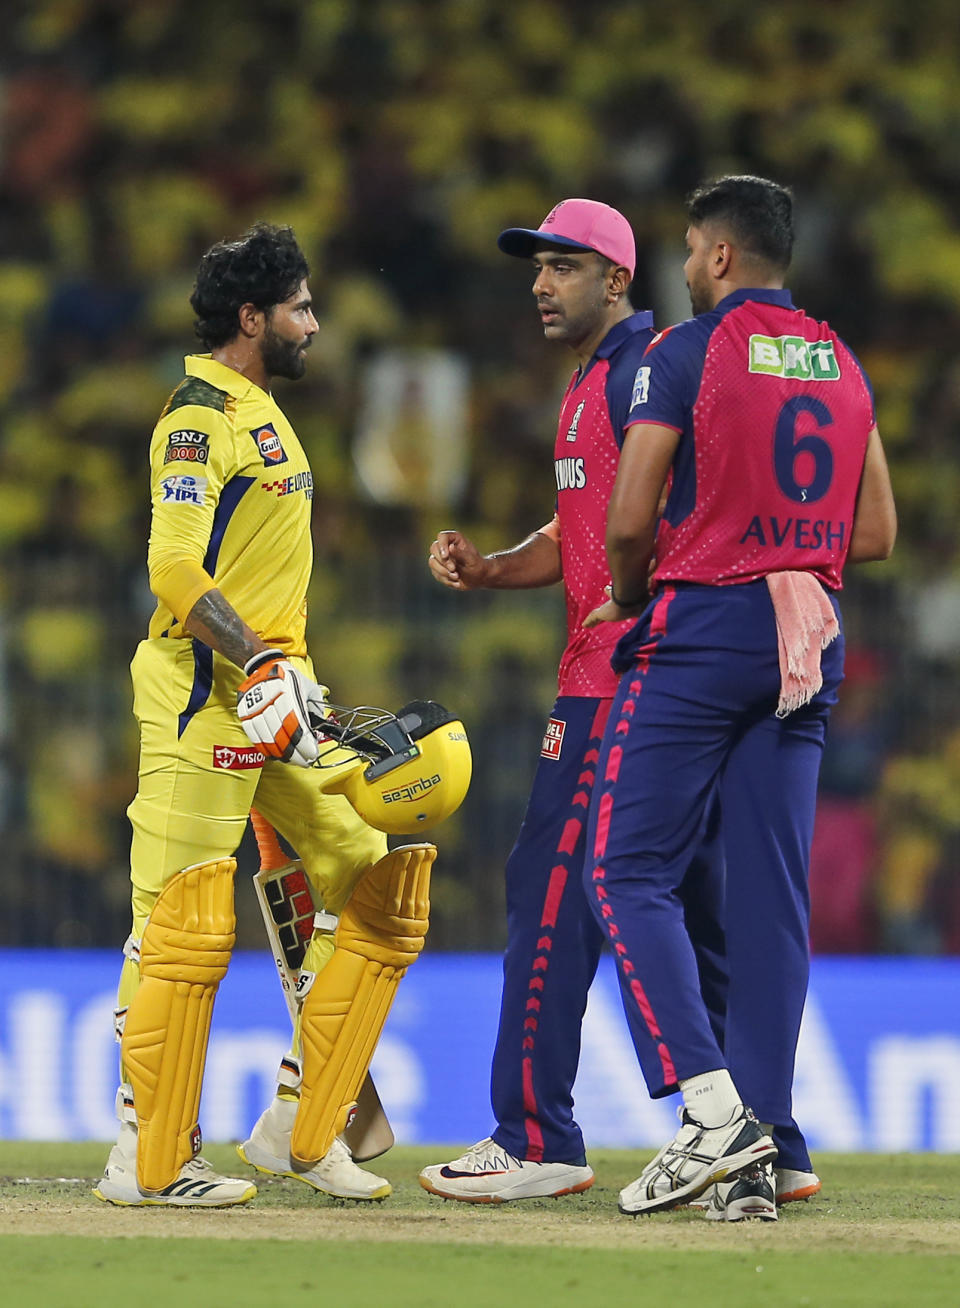 Chennai Super Kings' Ravindra Jadeja, left, argues with Rajasthan Royals' Ravichandran Ashwin, center, after he is give out for obstructing the field during the Indian Premier League cricket match between Chennai Super Kings and Rajasthan Royals in Chennai, India, Sunday, May 12, 2024. (AP Photo/R. Parthibhan)